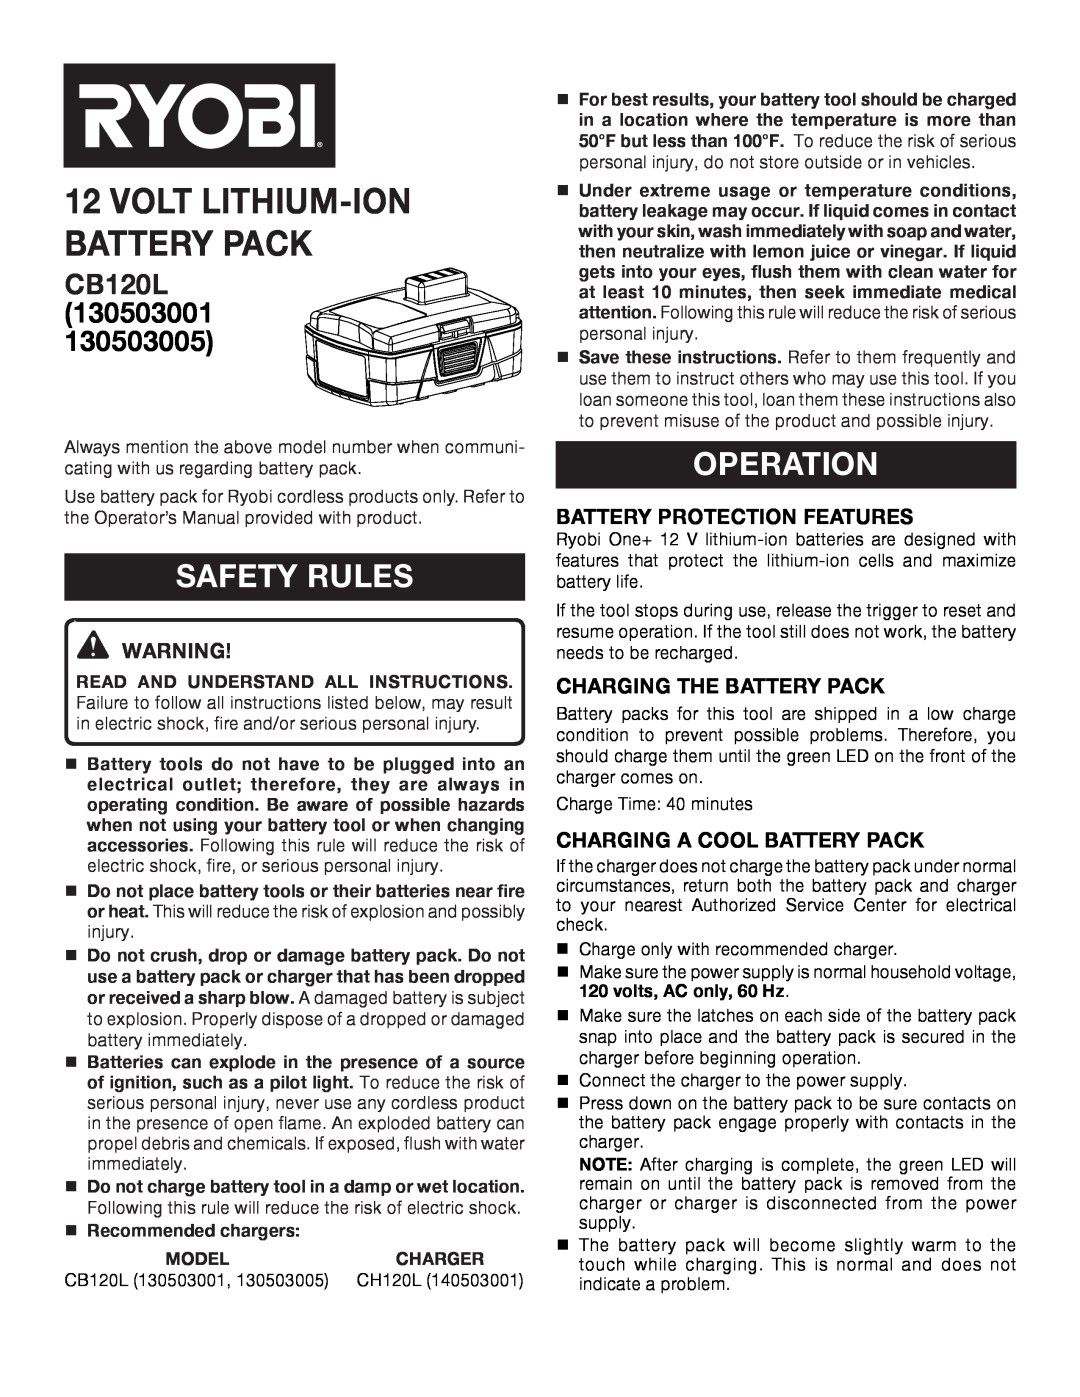 Ryobi 140503001, CH120L manual safety rules, operation, CB120L 130503001 130503005, Battery Protection Features 